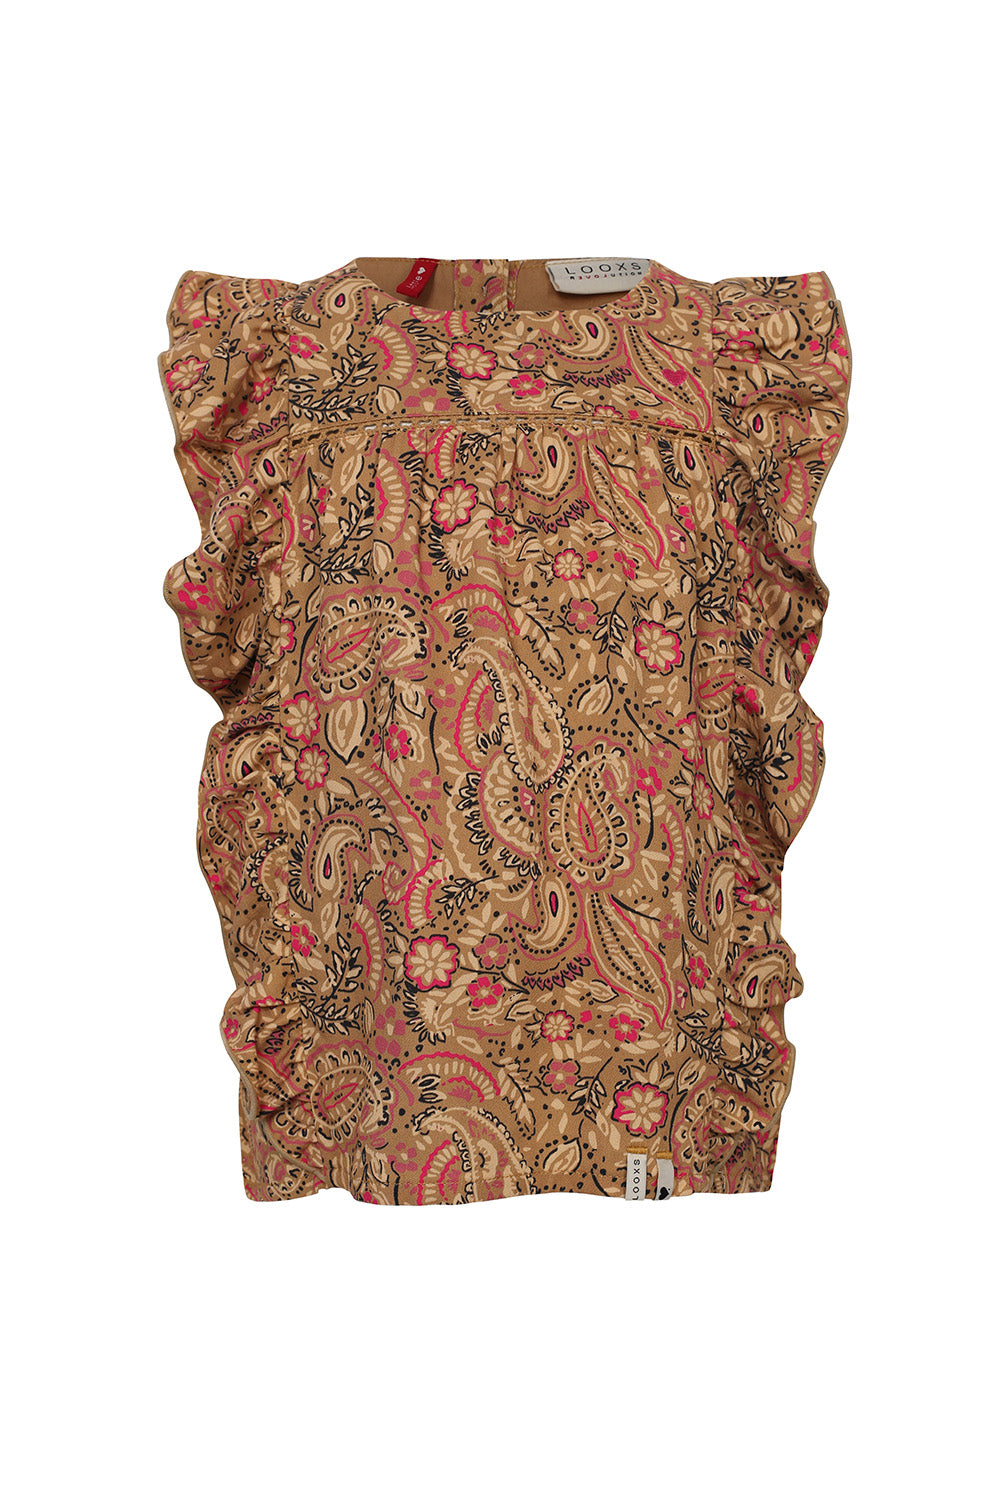 LOOXS Little Paisley Top